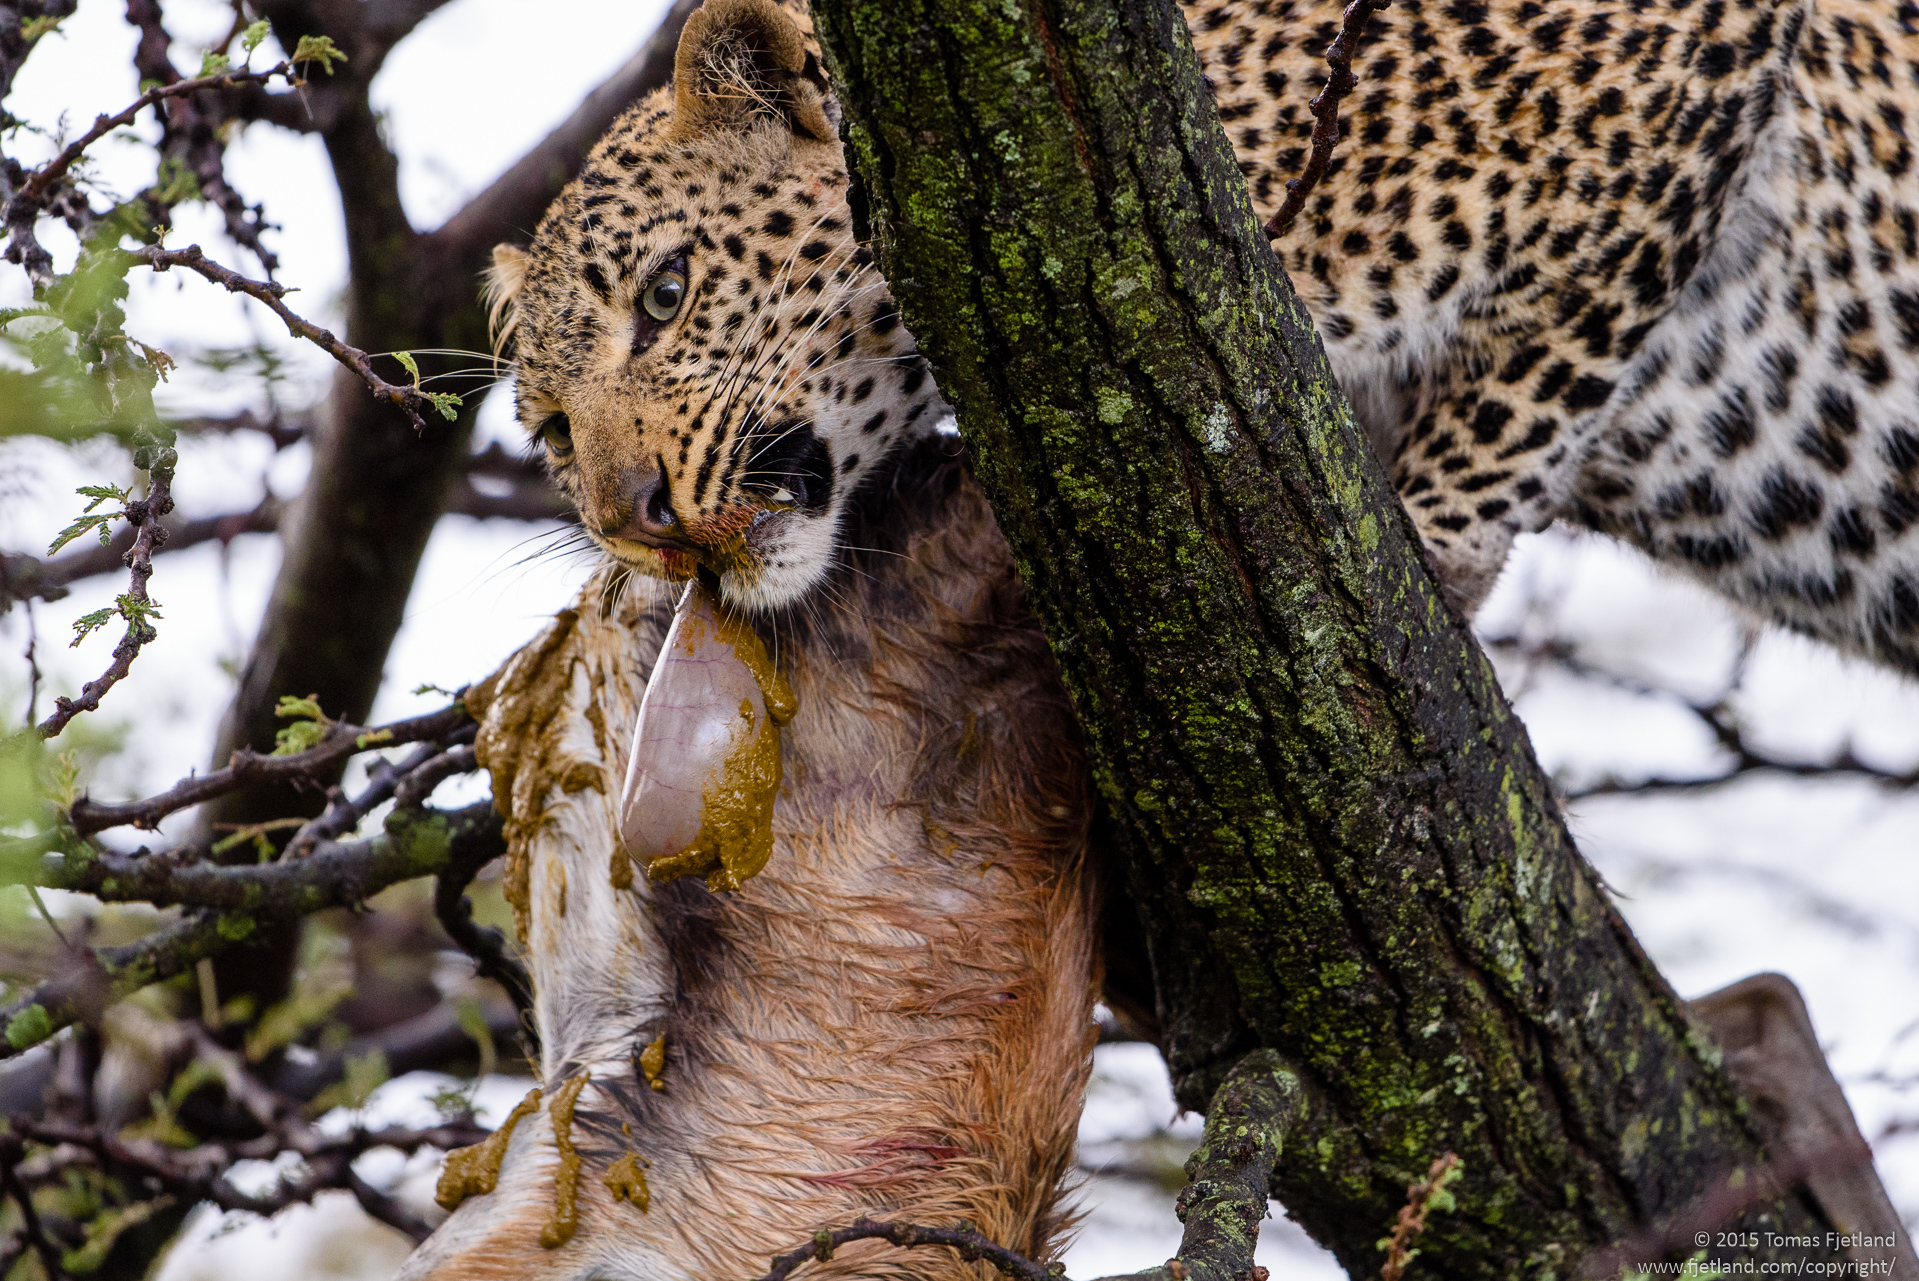 Fig the leopard eating its kill. No, I don't know why it starts with the stomach either